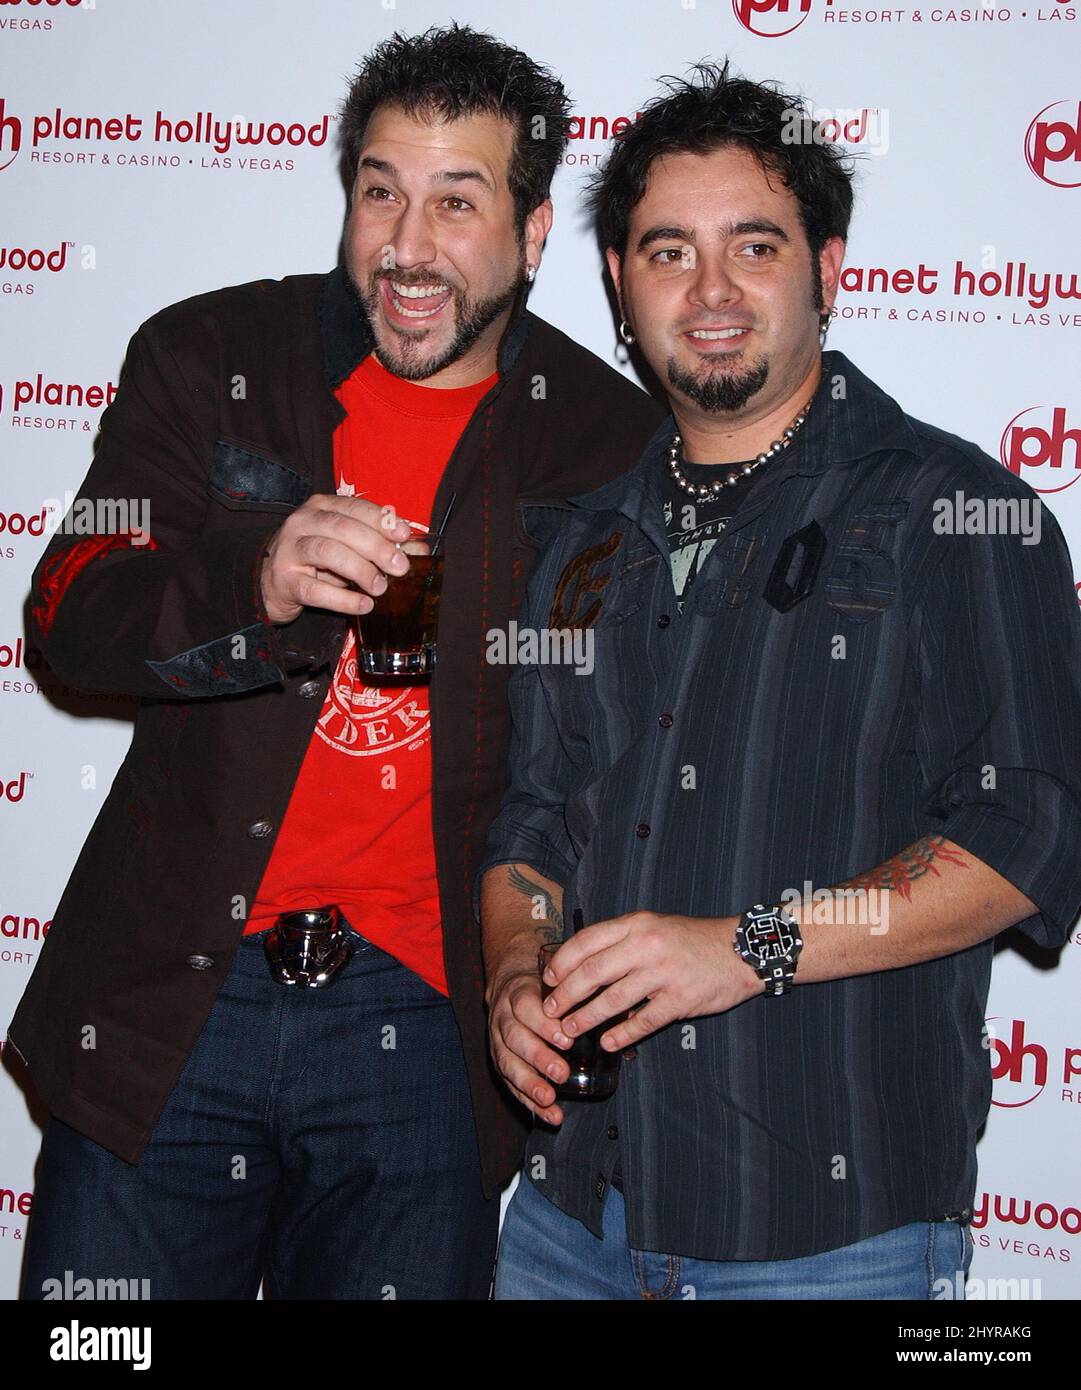 Joey Fatone and Chris Kirkpatrick attend the Planet Hollywood Resort and Casino Grand Opening in Las Vegas. Stock Photo